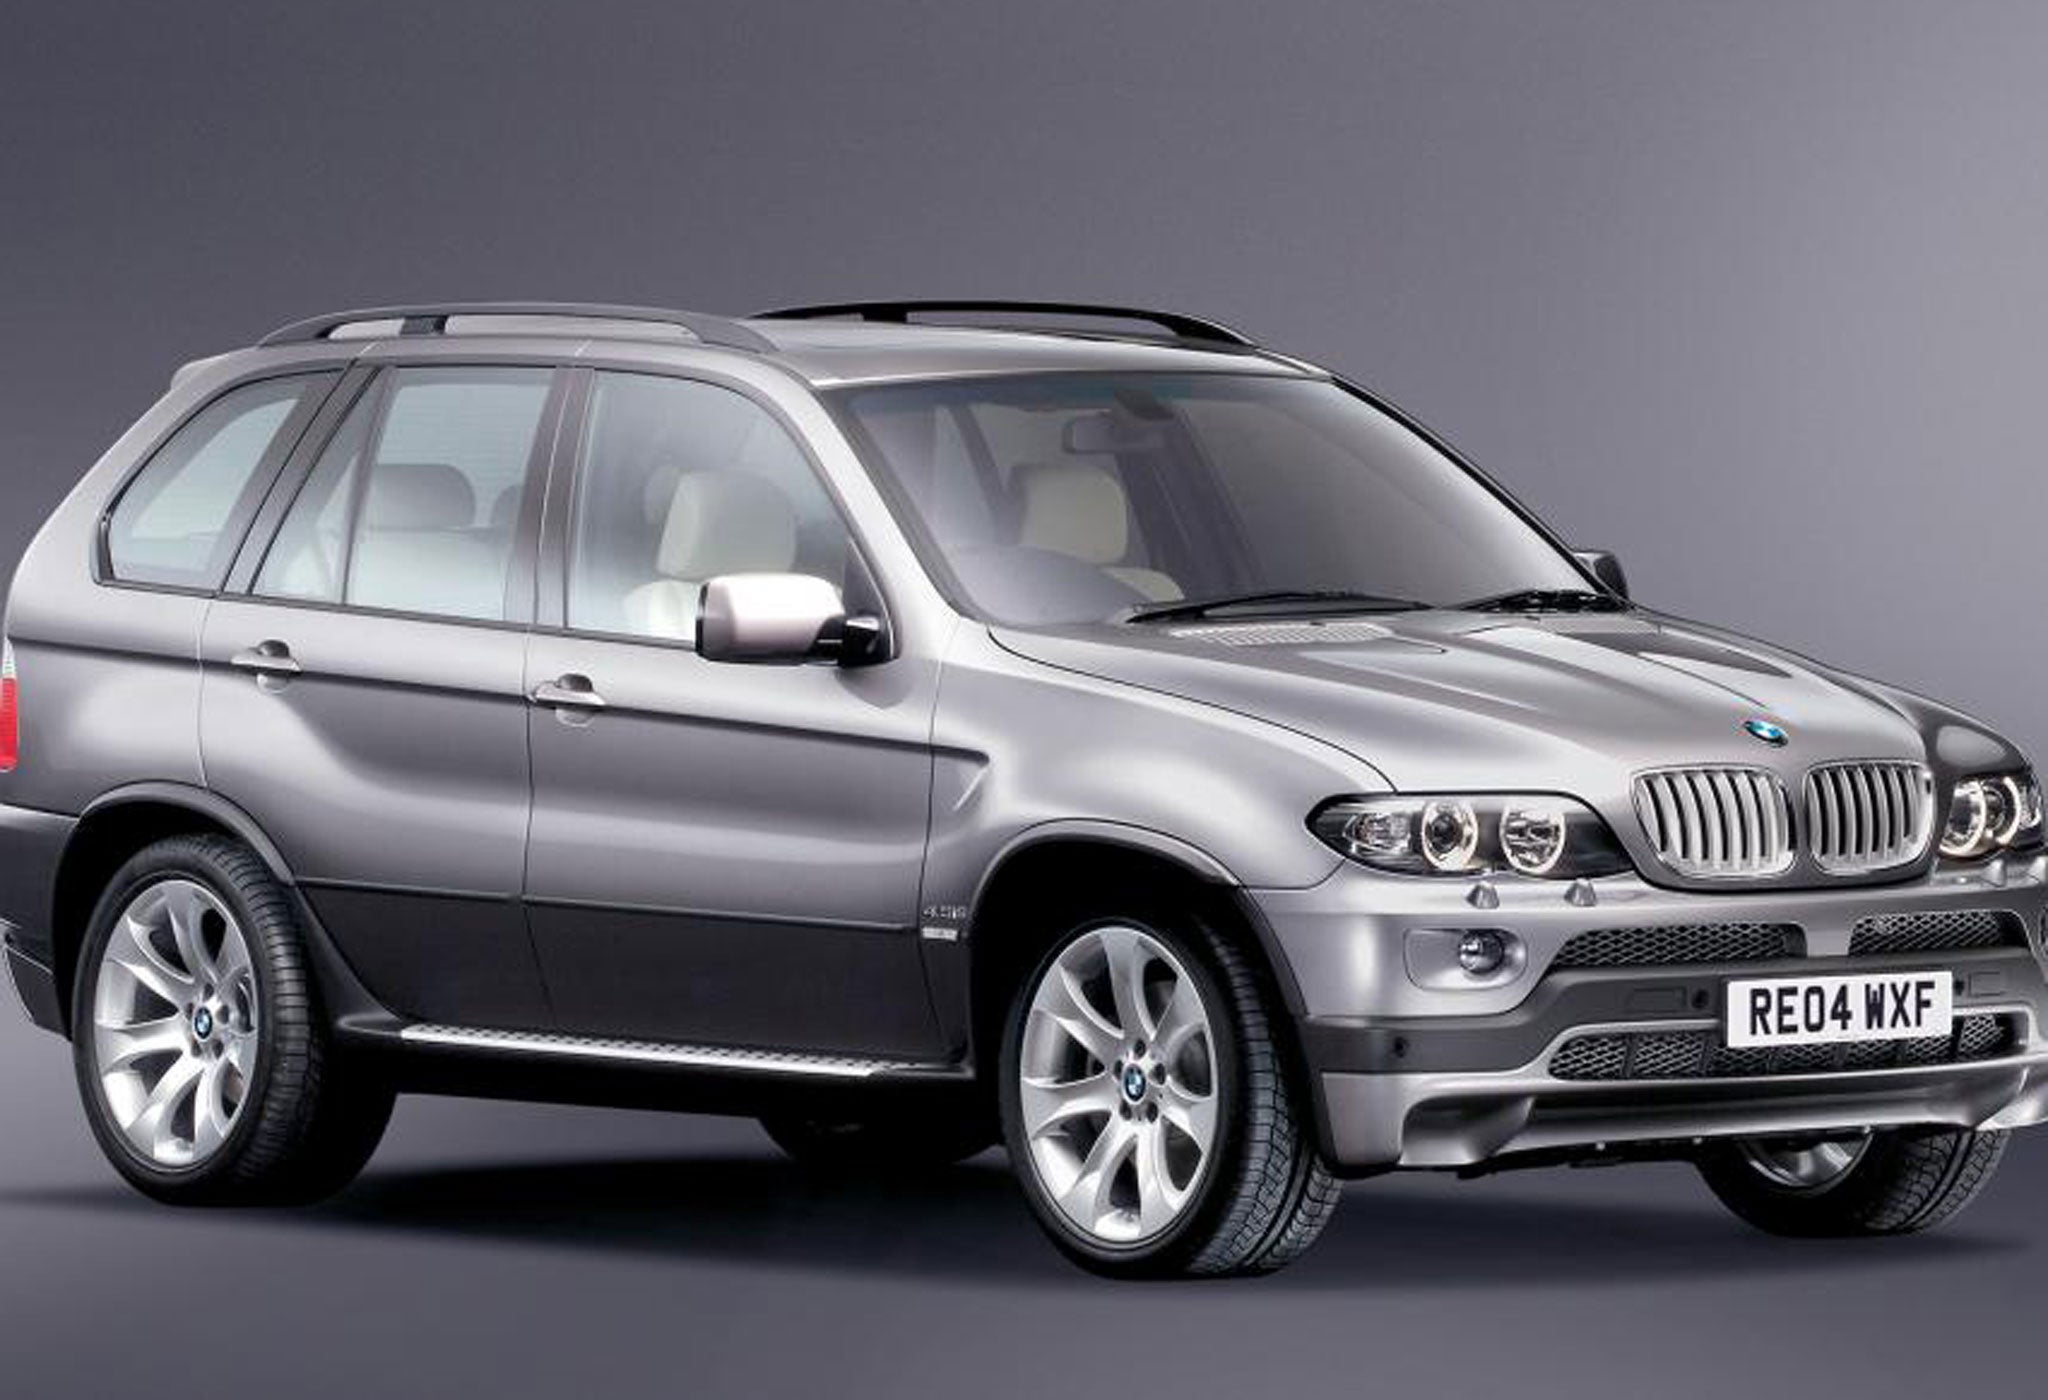 Shuanghuan SCEO thinks it is a BMW X5